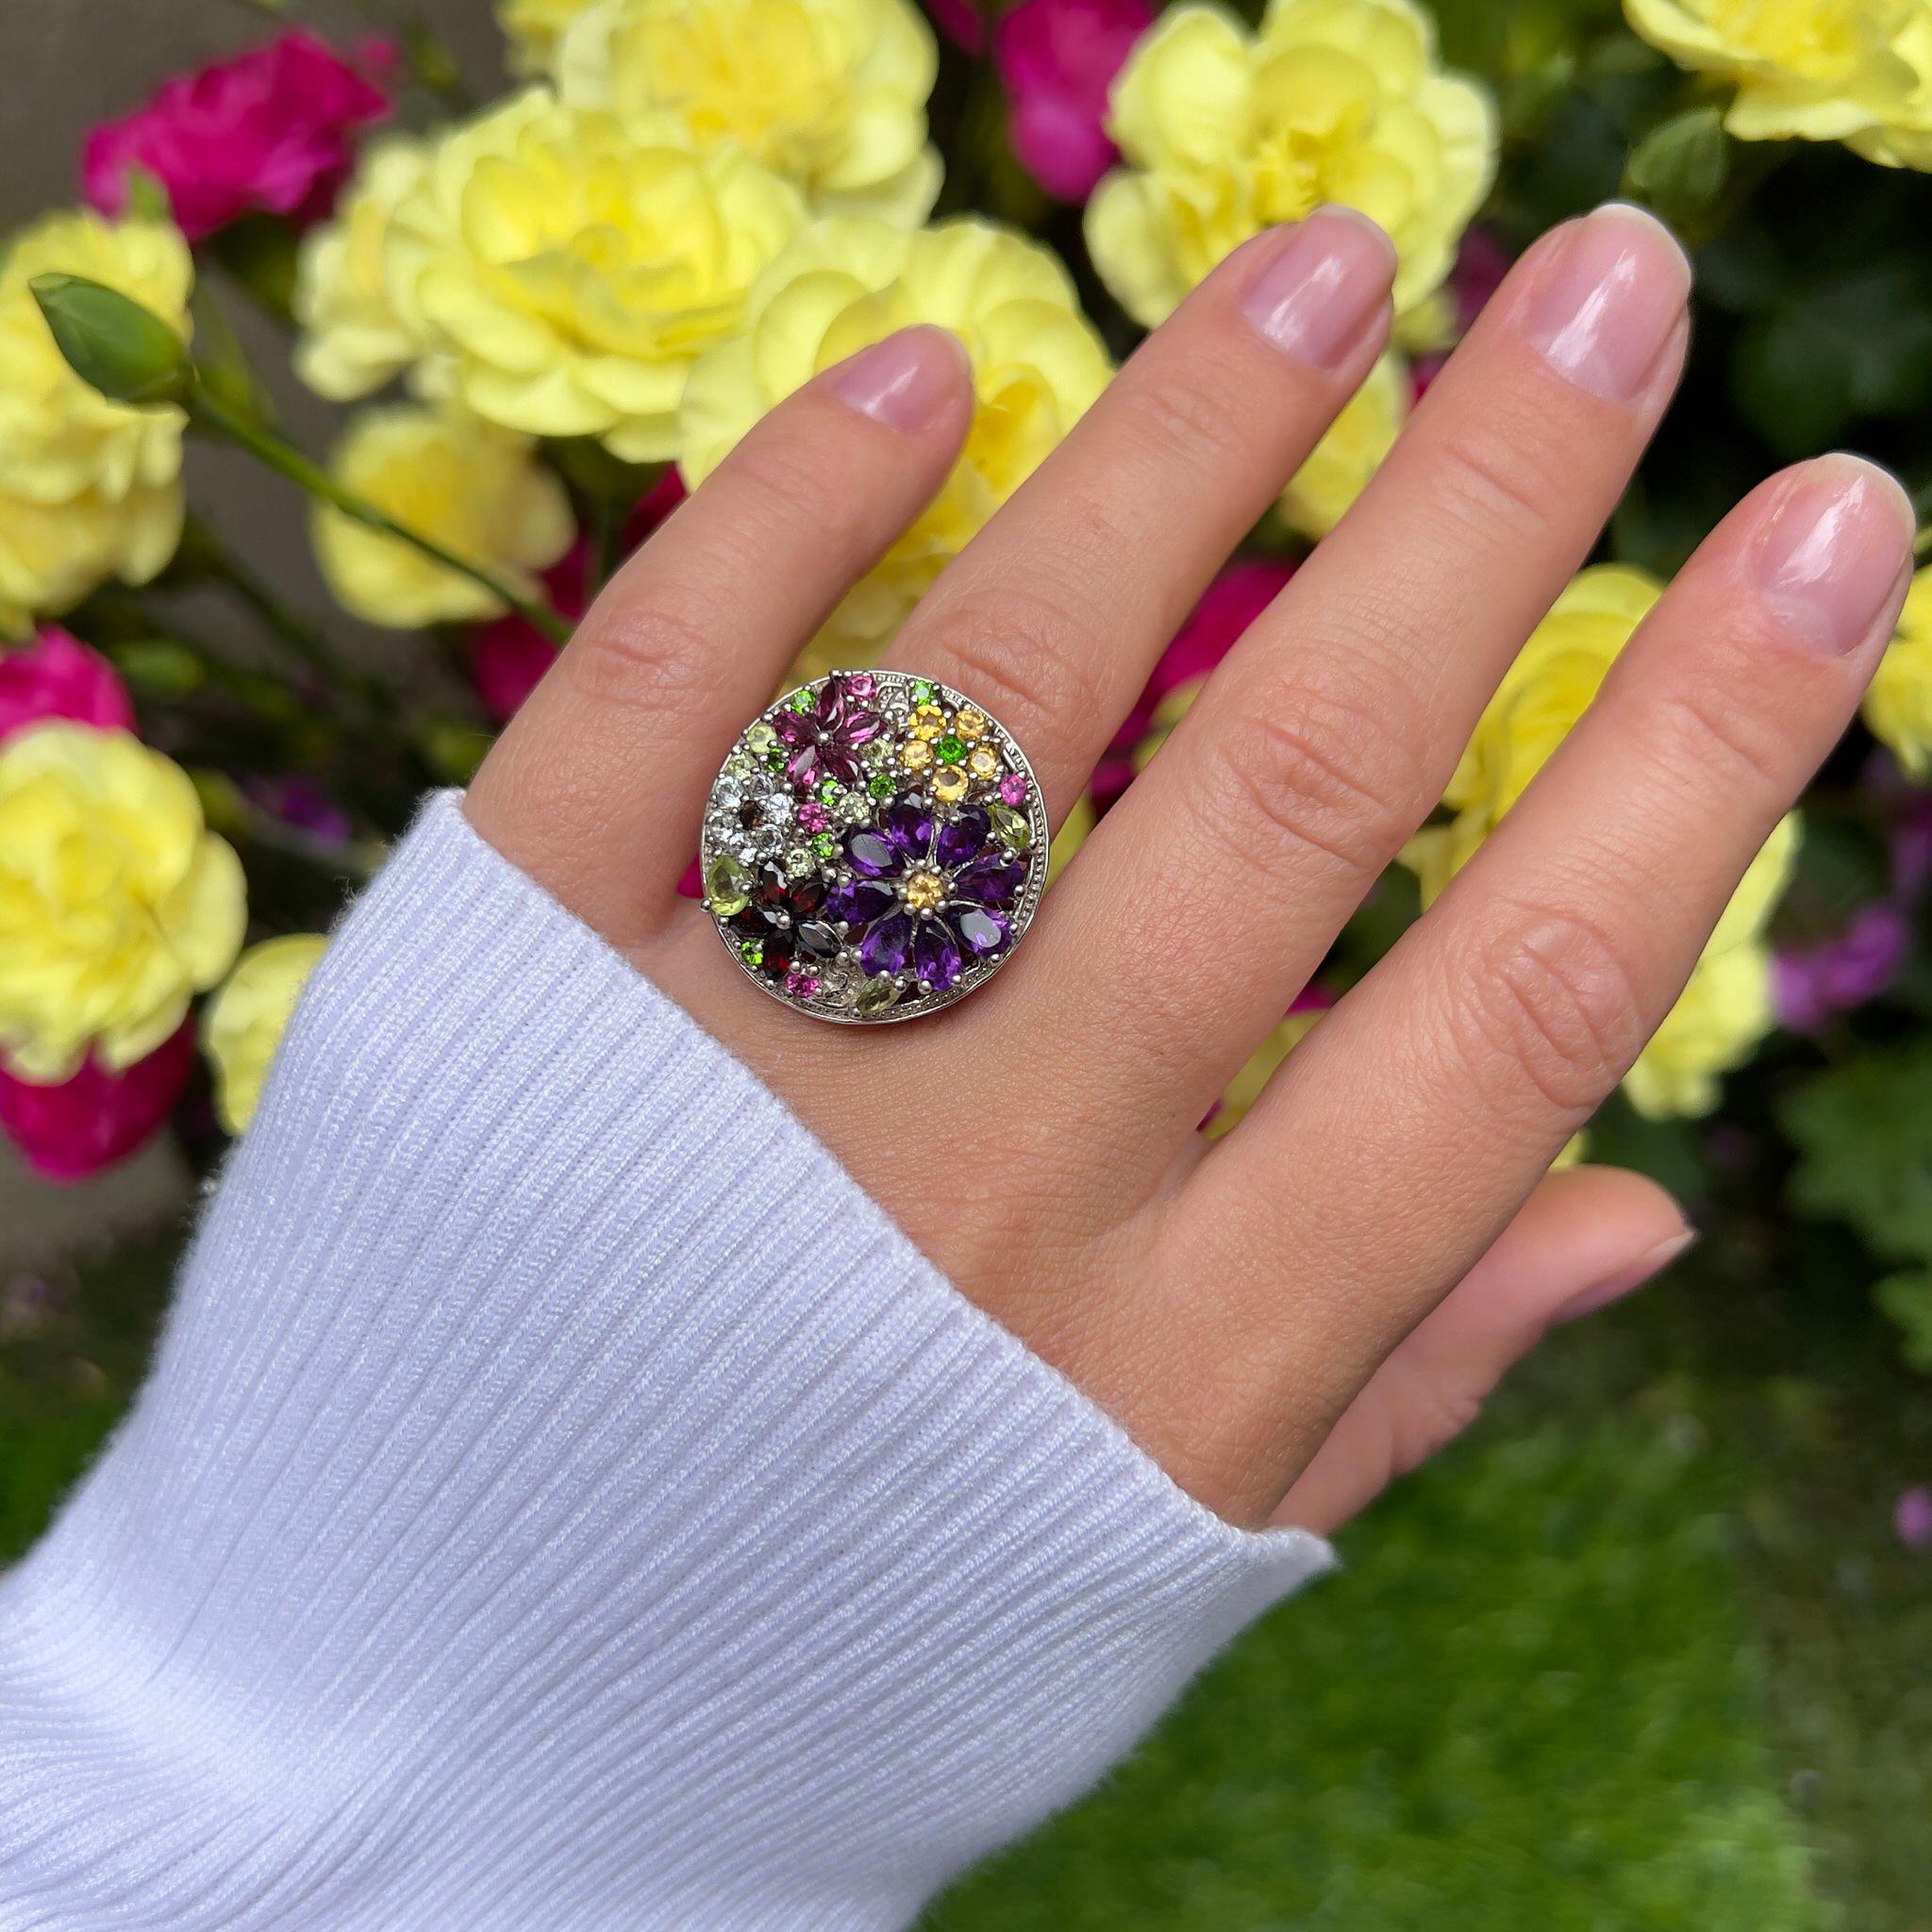 Mixed Cut Natural Multi Colored Gemstones Flower Ring 4 Carats Total